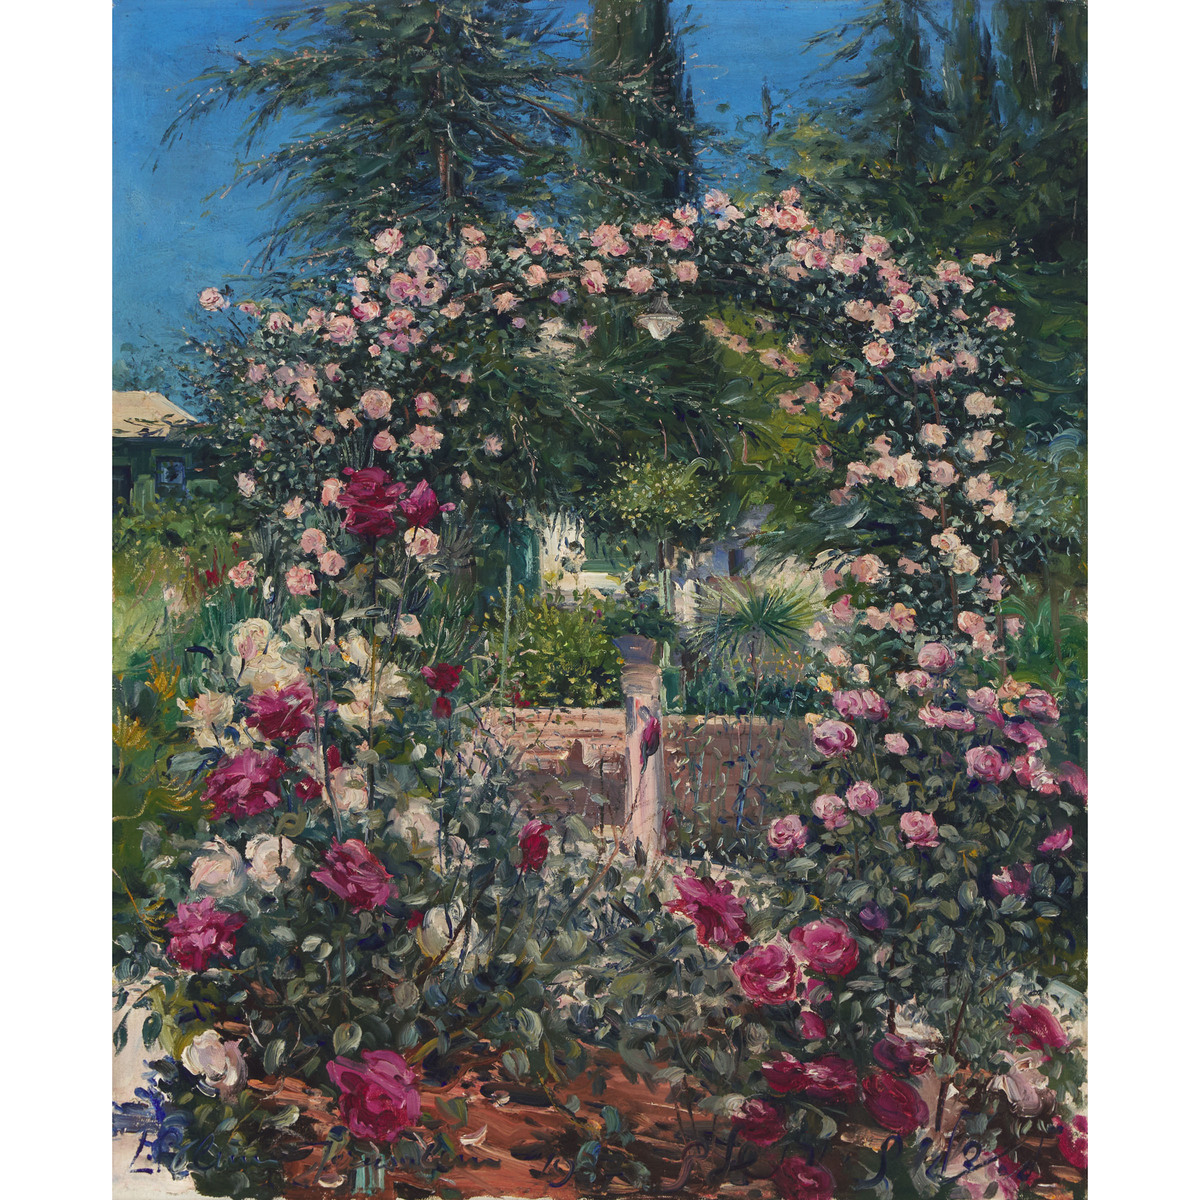 Ludwig Blum (1891-1974), ROSE GARDEN, 1937, signed, dated, and situated "Jerusalem" lower left, 29 x